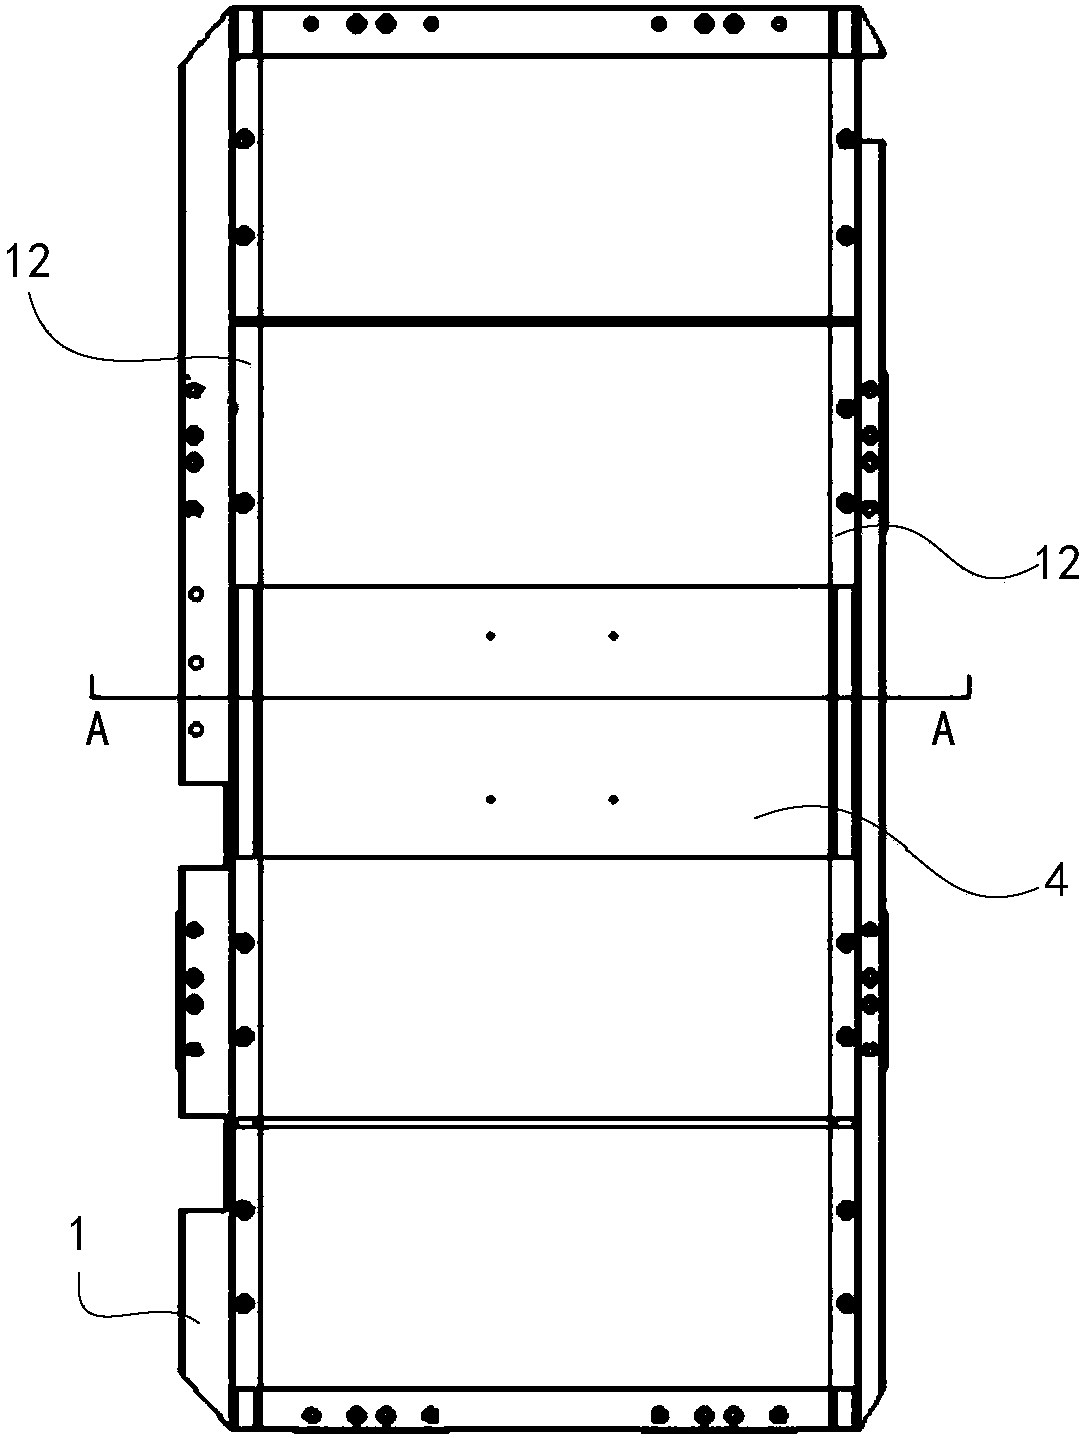 Two-layer module bracket and battery pack